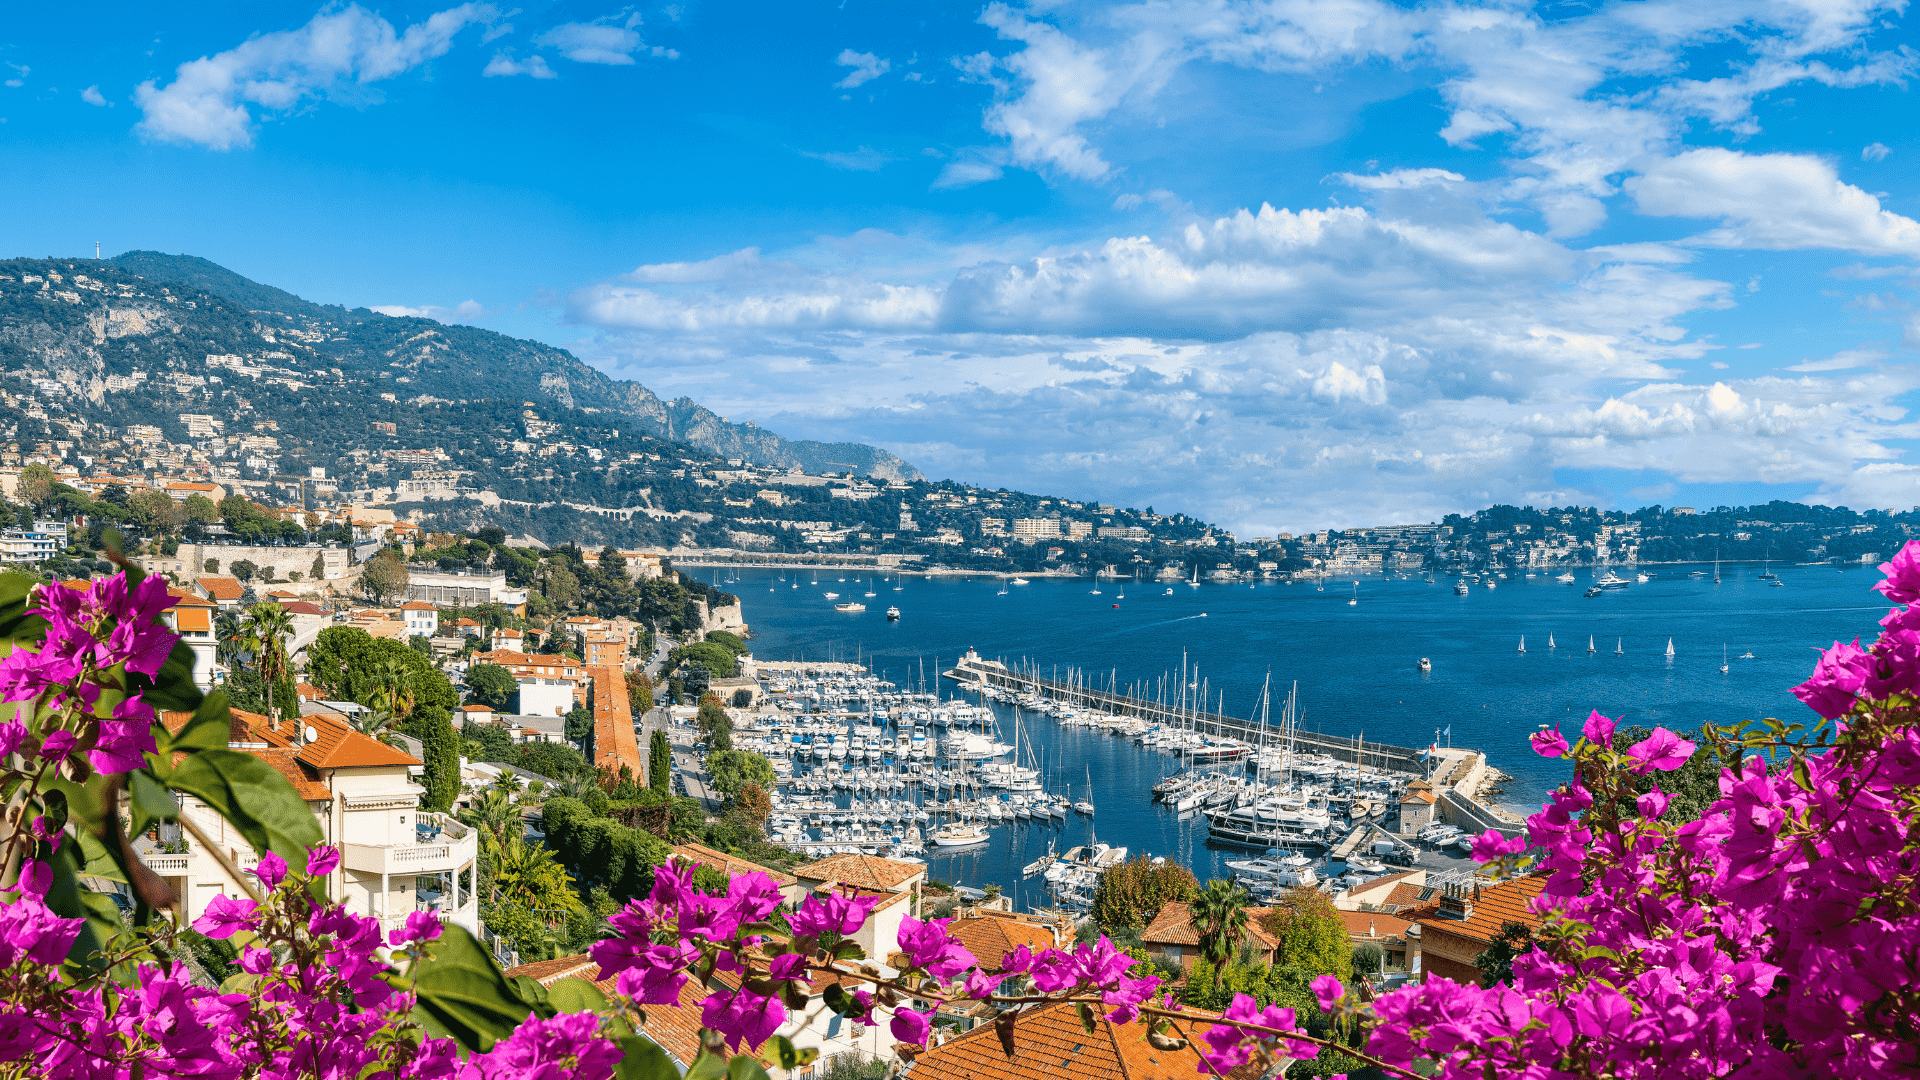 South of France - The French Riviera